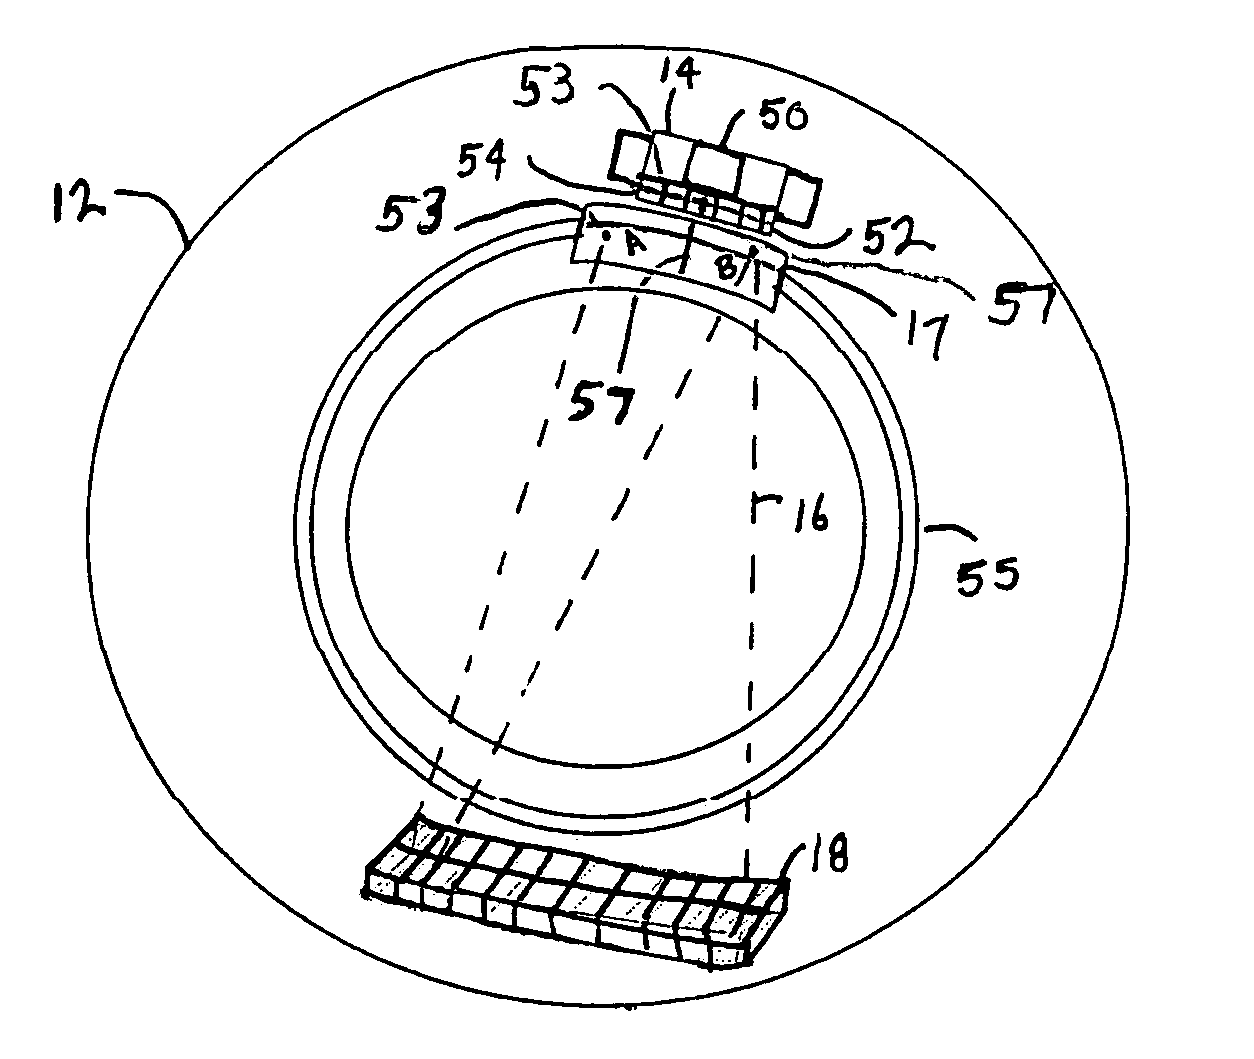 Integrated arc anode x-ray source for a computed tomography system